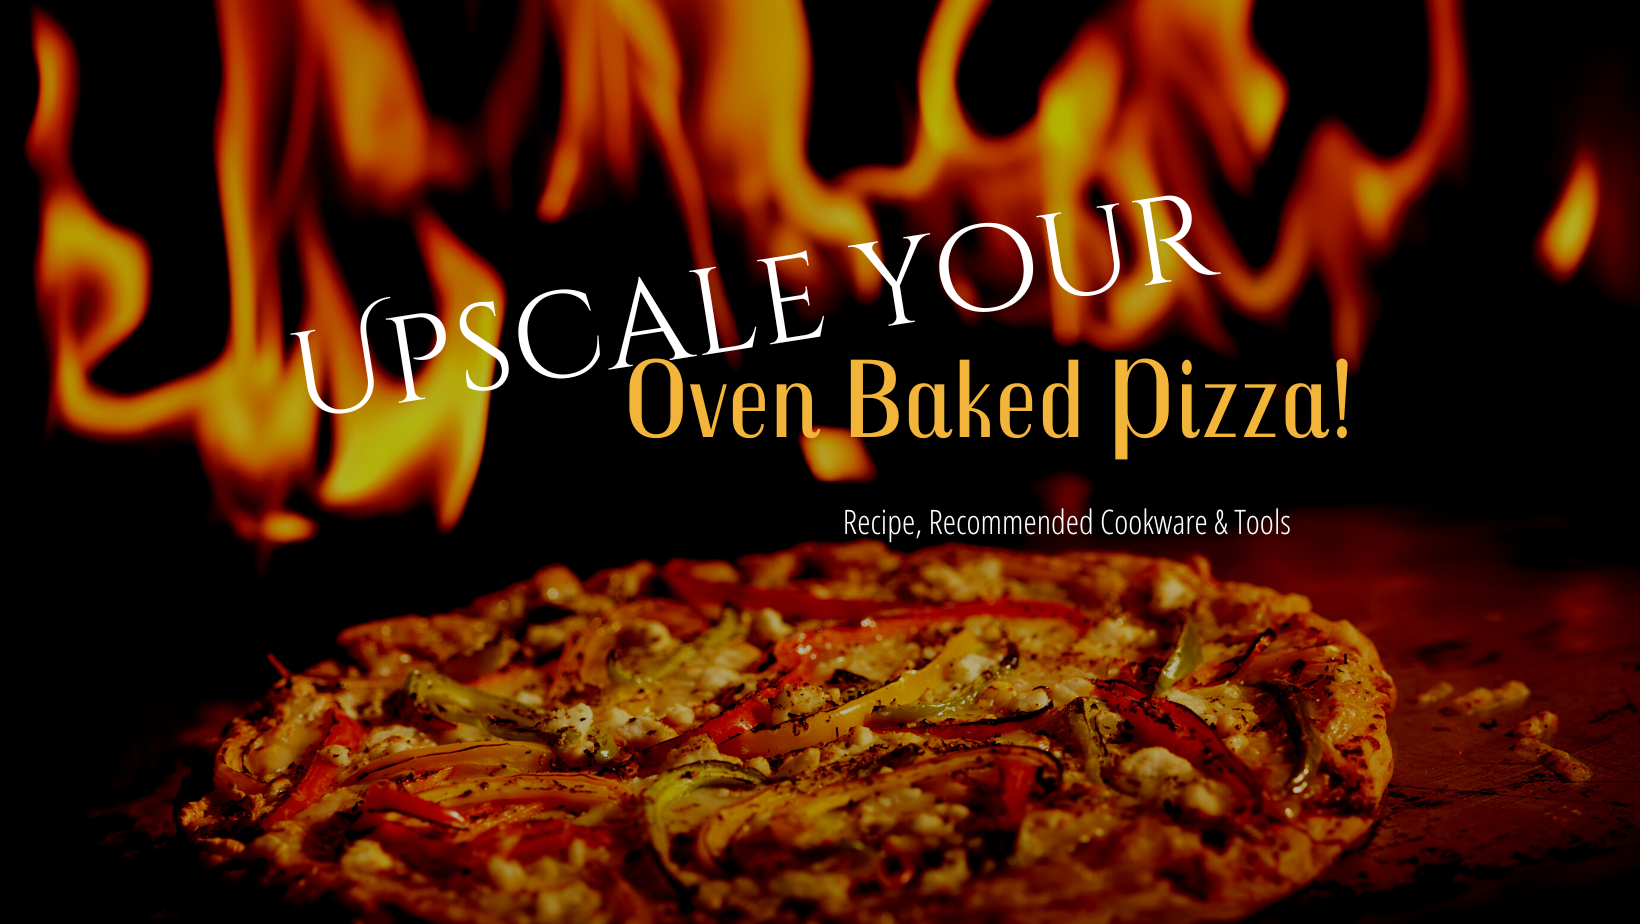 Go ahead and upscale your oven baked Pizza!